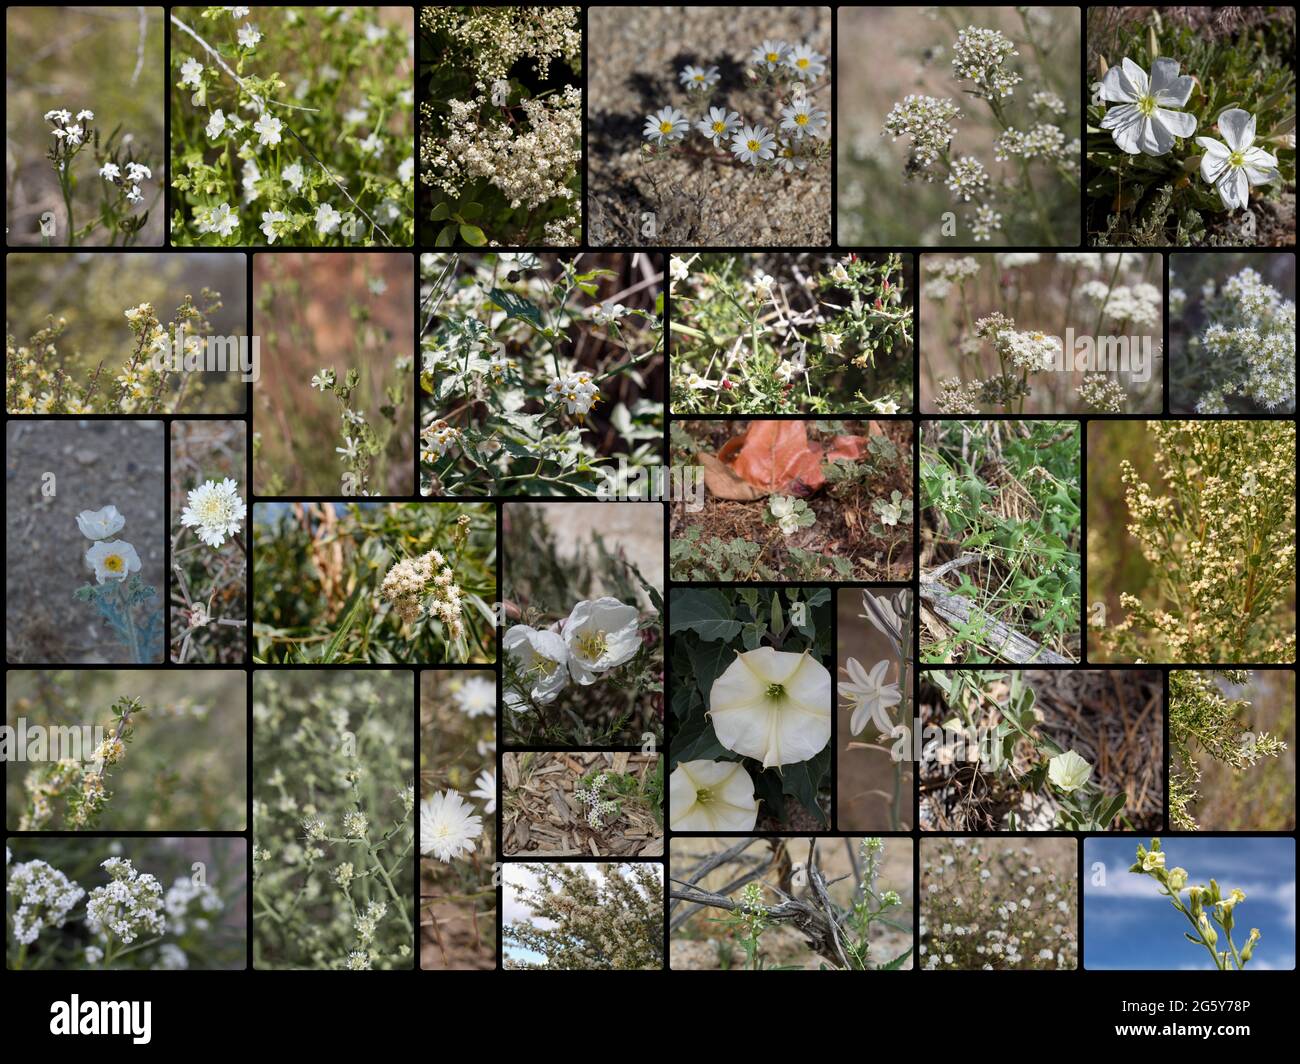 32 species of white blooming Southern California indigenous plants growing wild in their native habitat. Photographed during 2020. Stock Photo